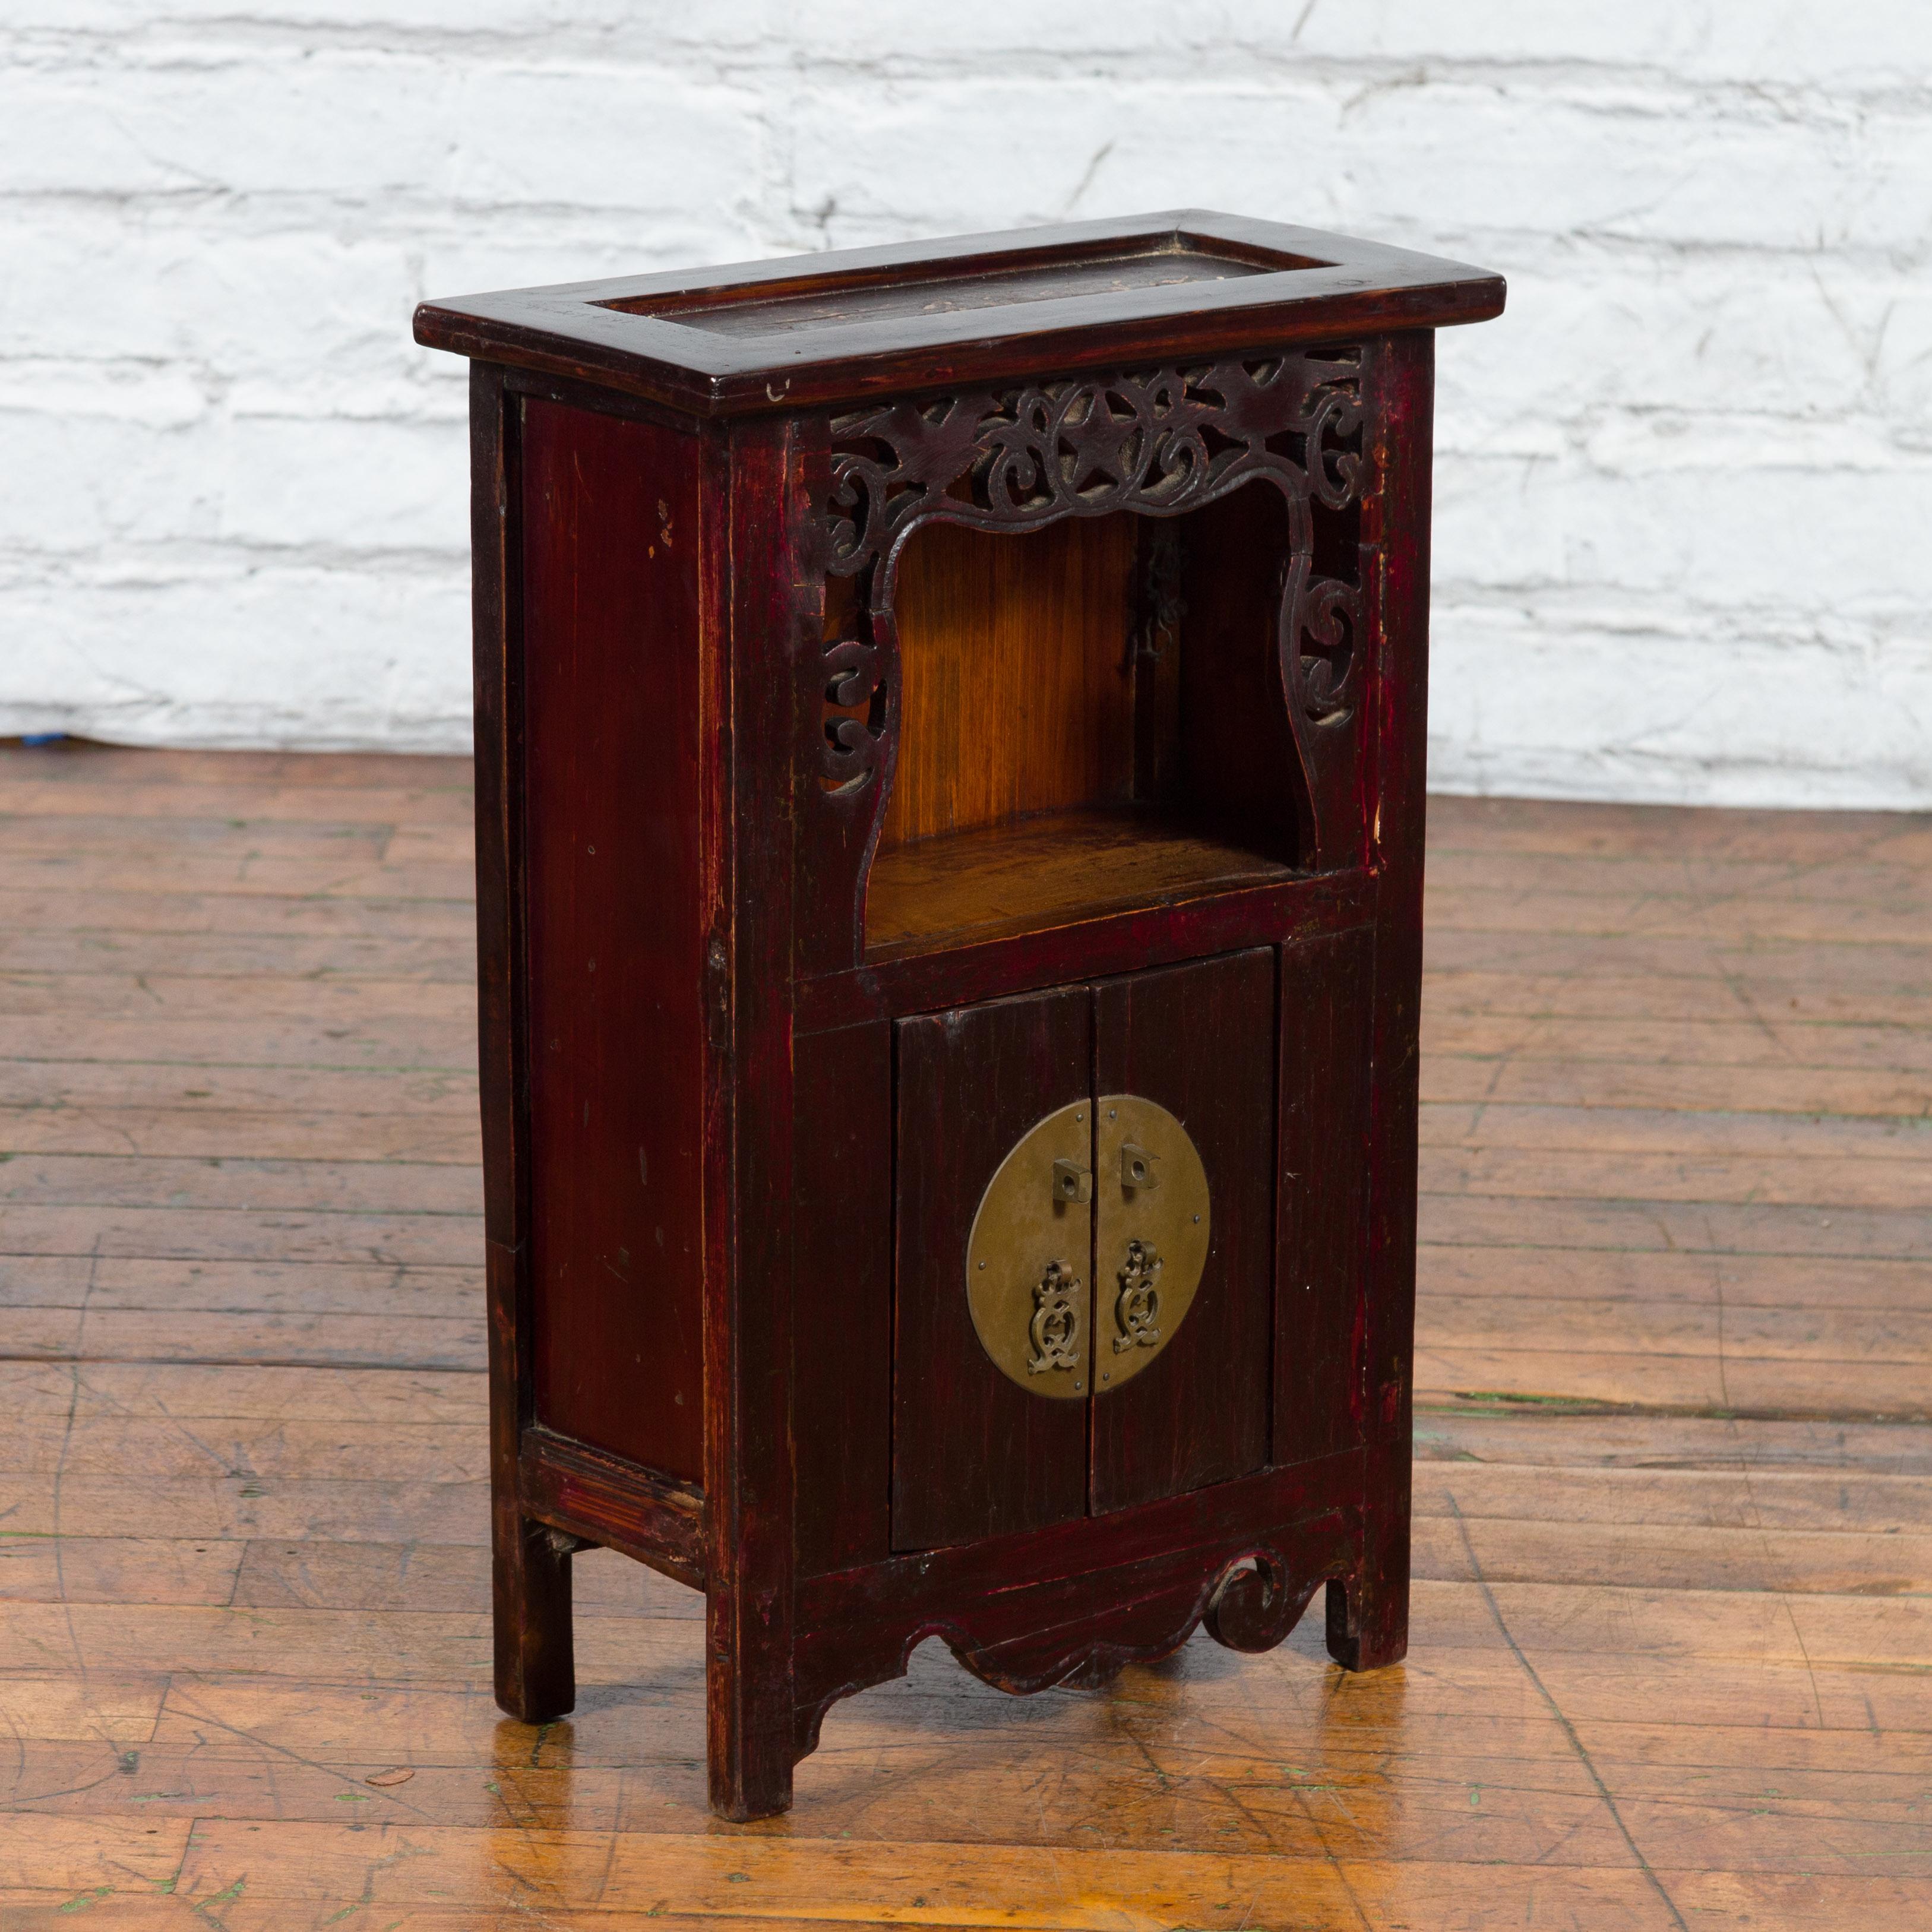 A Chinese Qing Dynasty period jewelry cabinet from the 19th century with star-carved open shelf, double doors, large brass medallion lock and carved apron. Created in China during the Qing Dynasty period in the 19th century, this jewelry cabinet